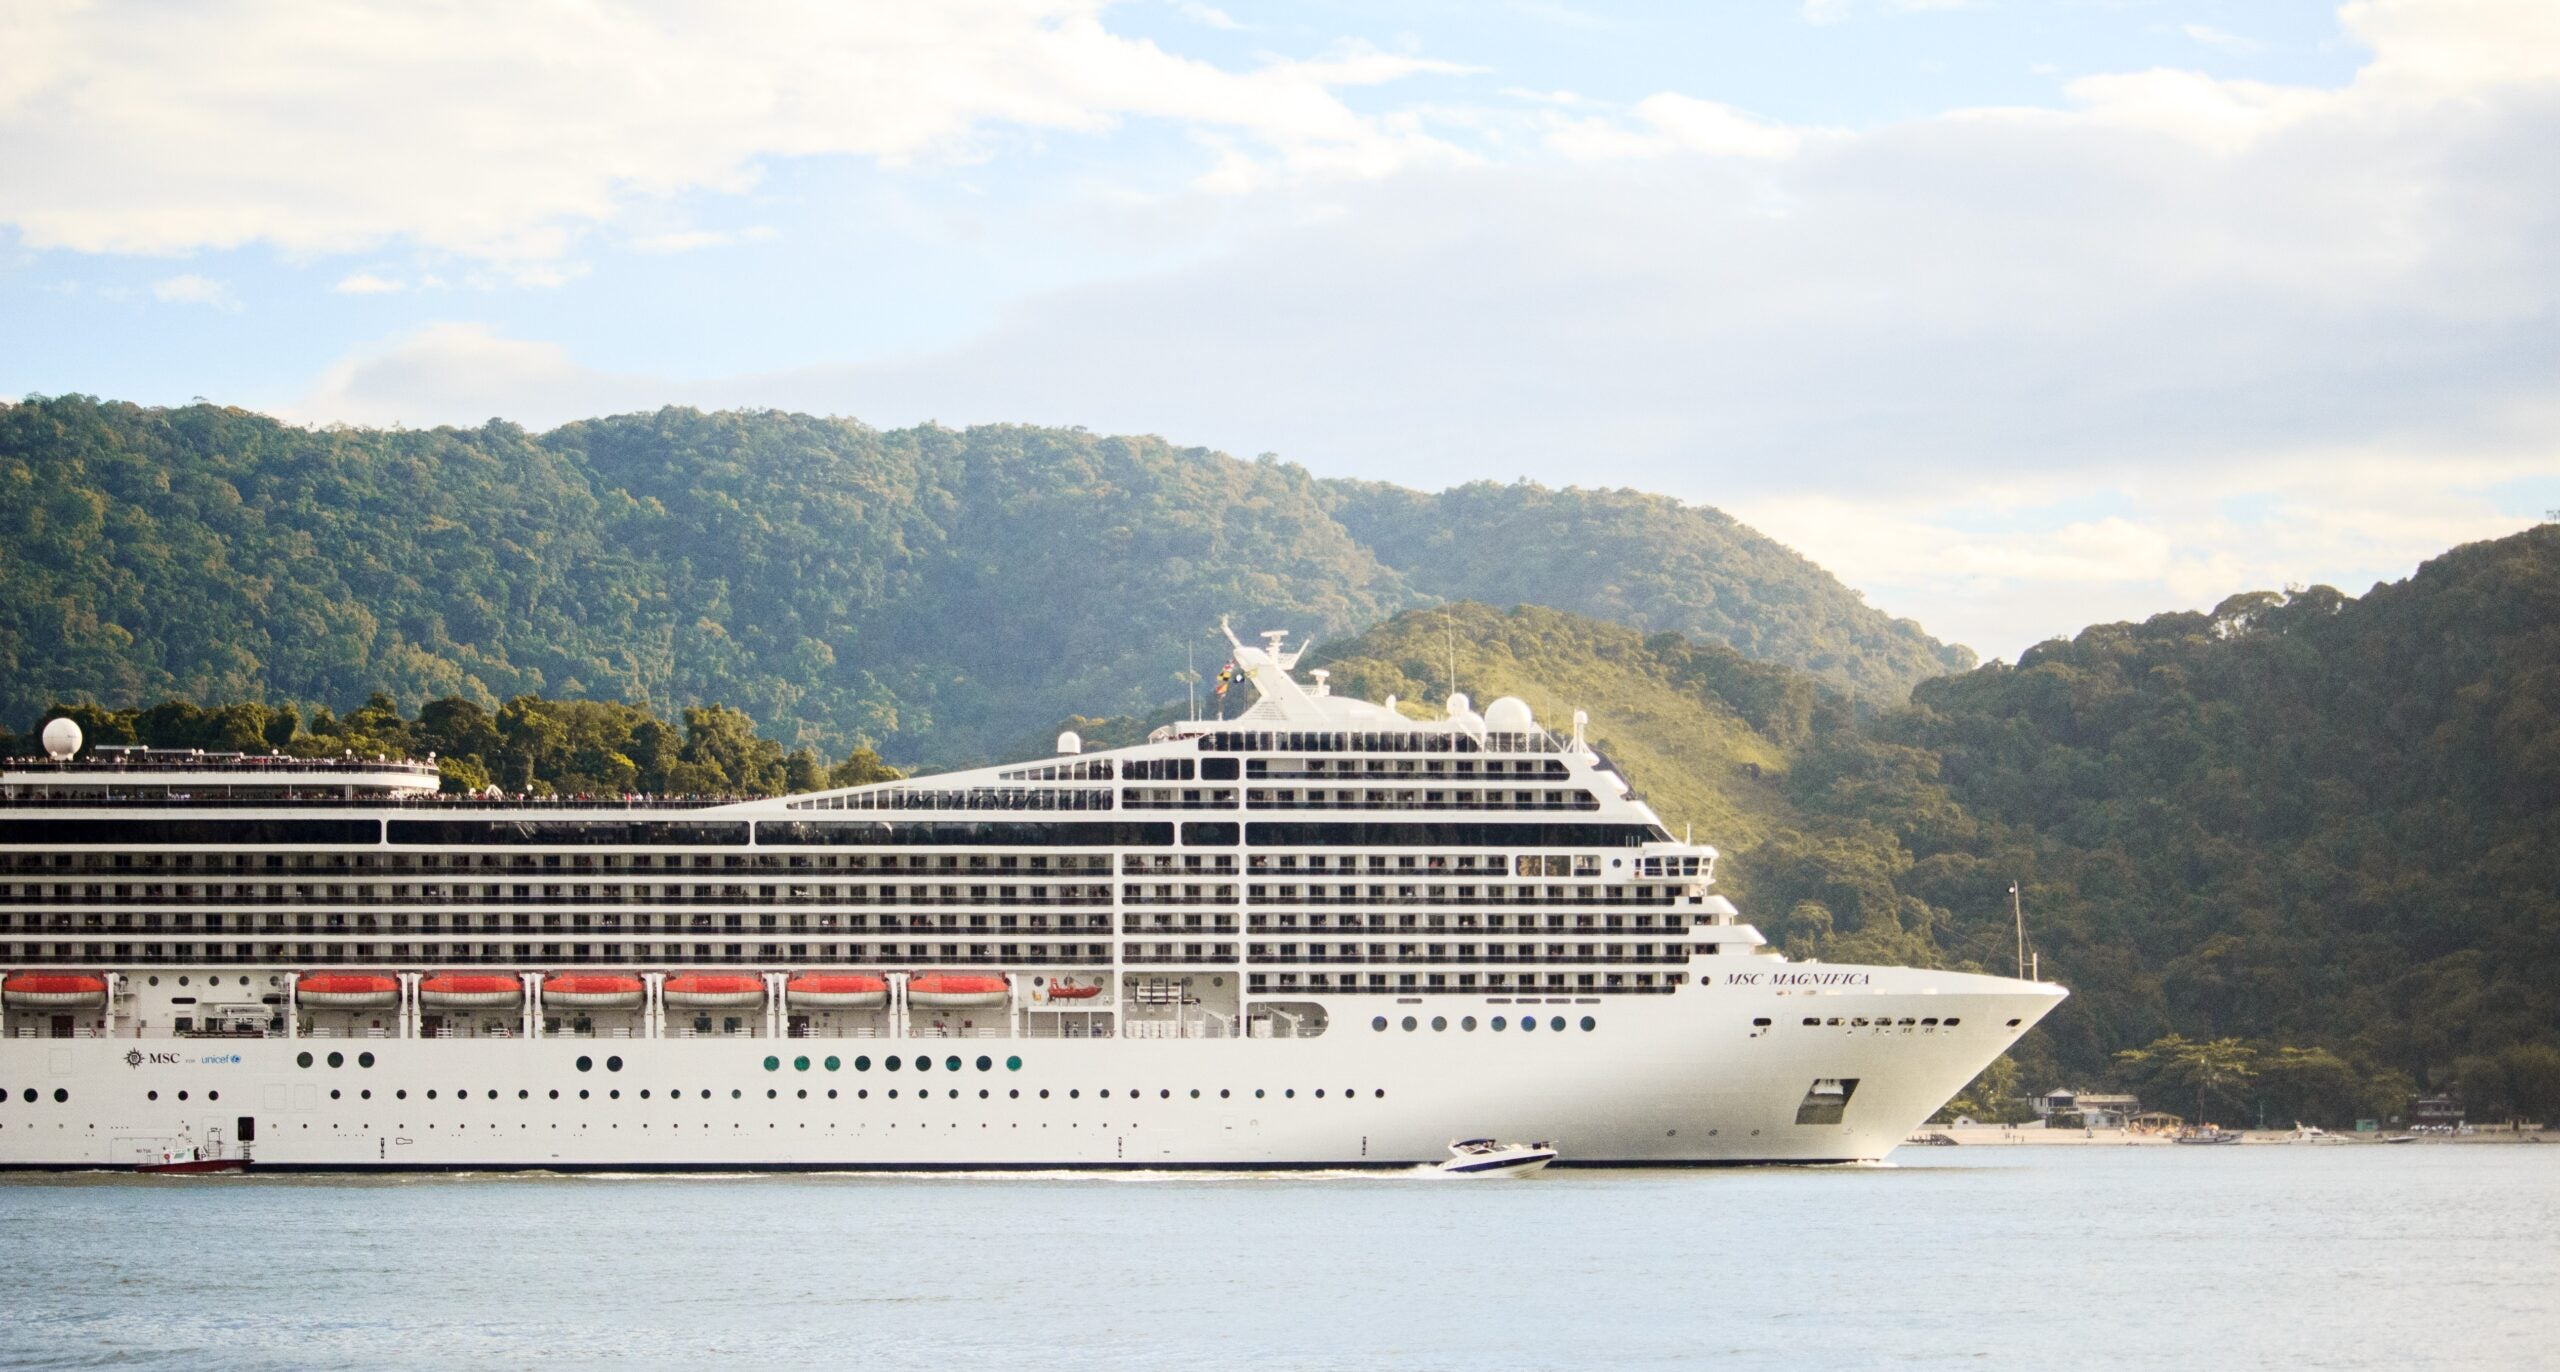 What’s on the horizon for the cruise industry?